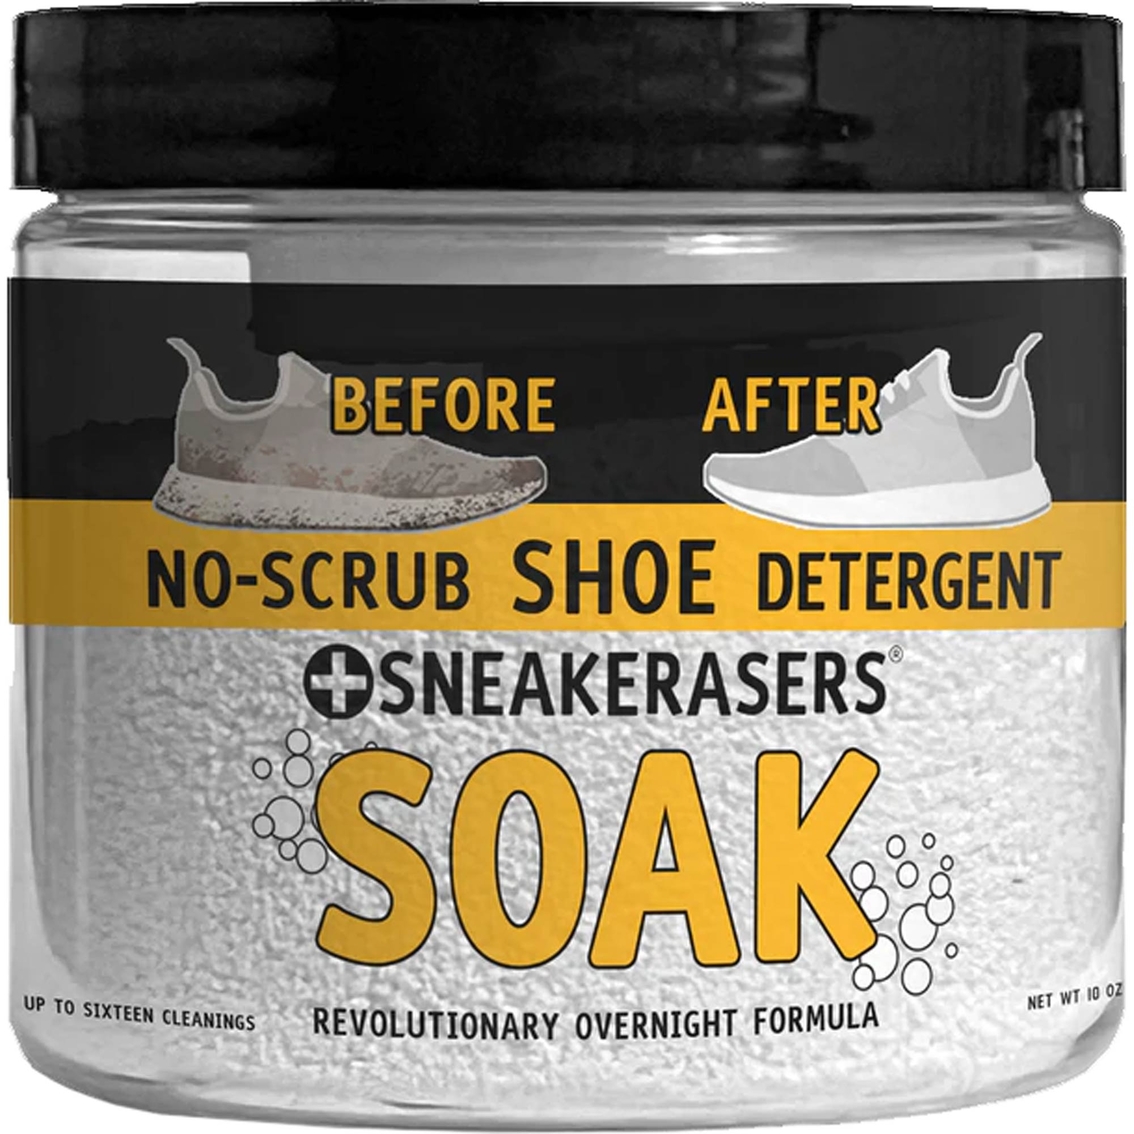 Sneak Erasers Soak Sneaker Detergent 10 Oz., Other Laundry Care, Household